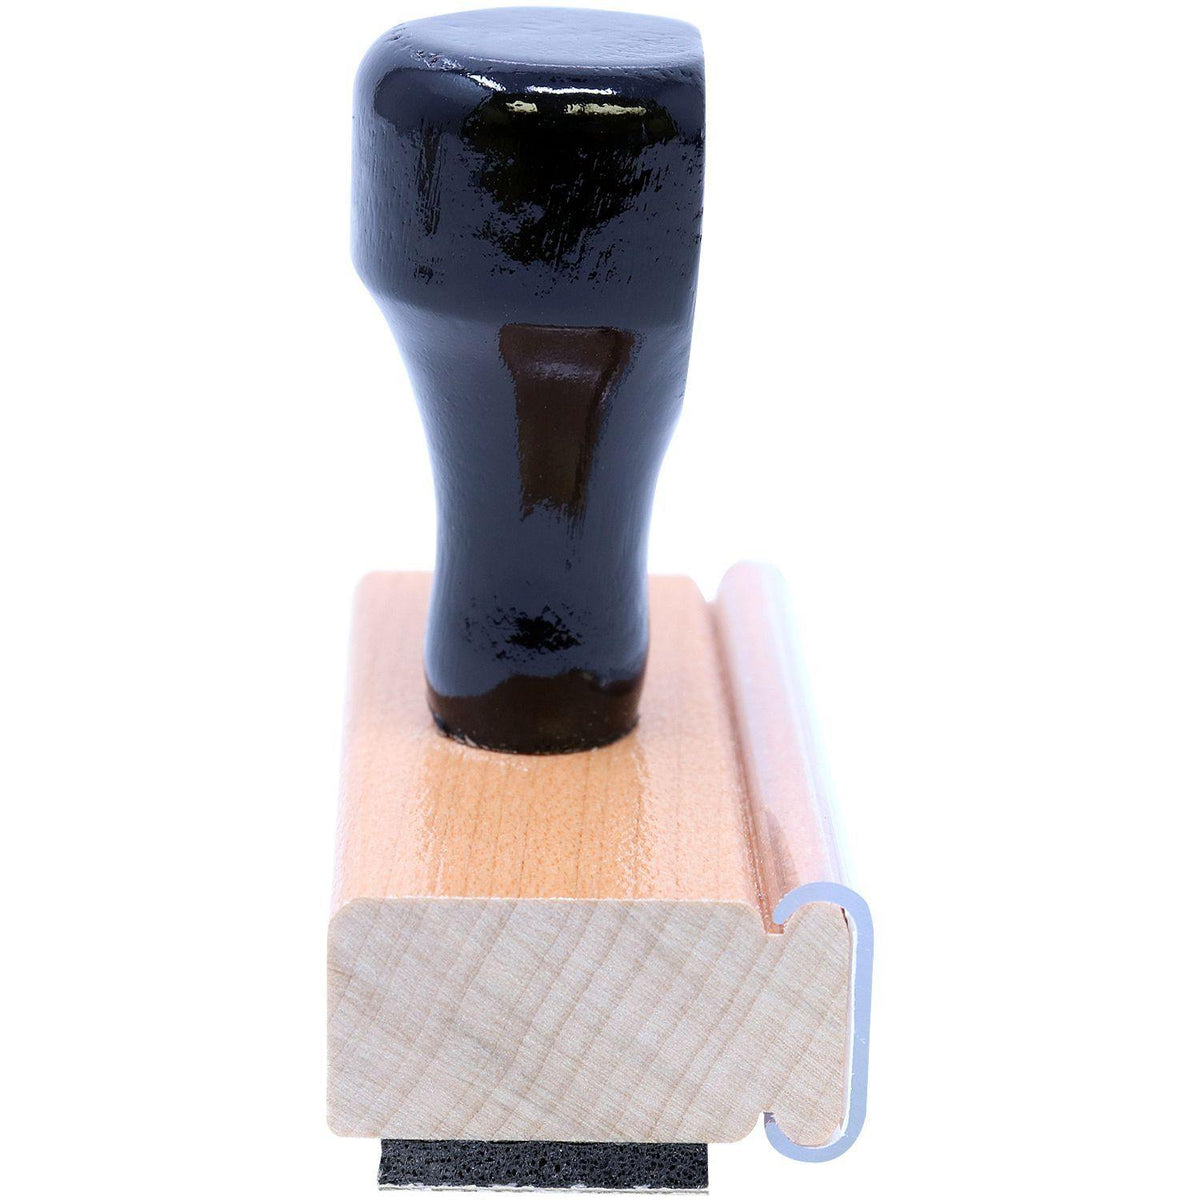 Round Draft Rubber Stamp - Engineer Seal Stamps - Brand_Acorn, Impression Size_Small, Stamp Type_Regular Stamp, Type of Use_General, Type of Use_Office